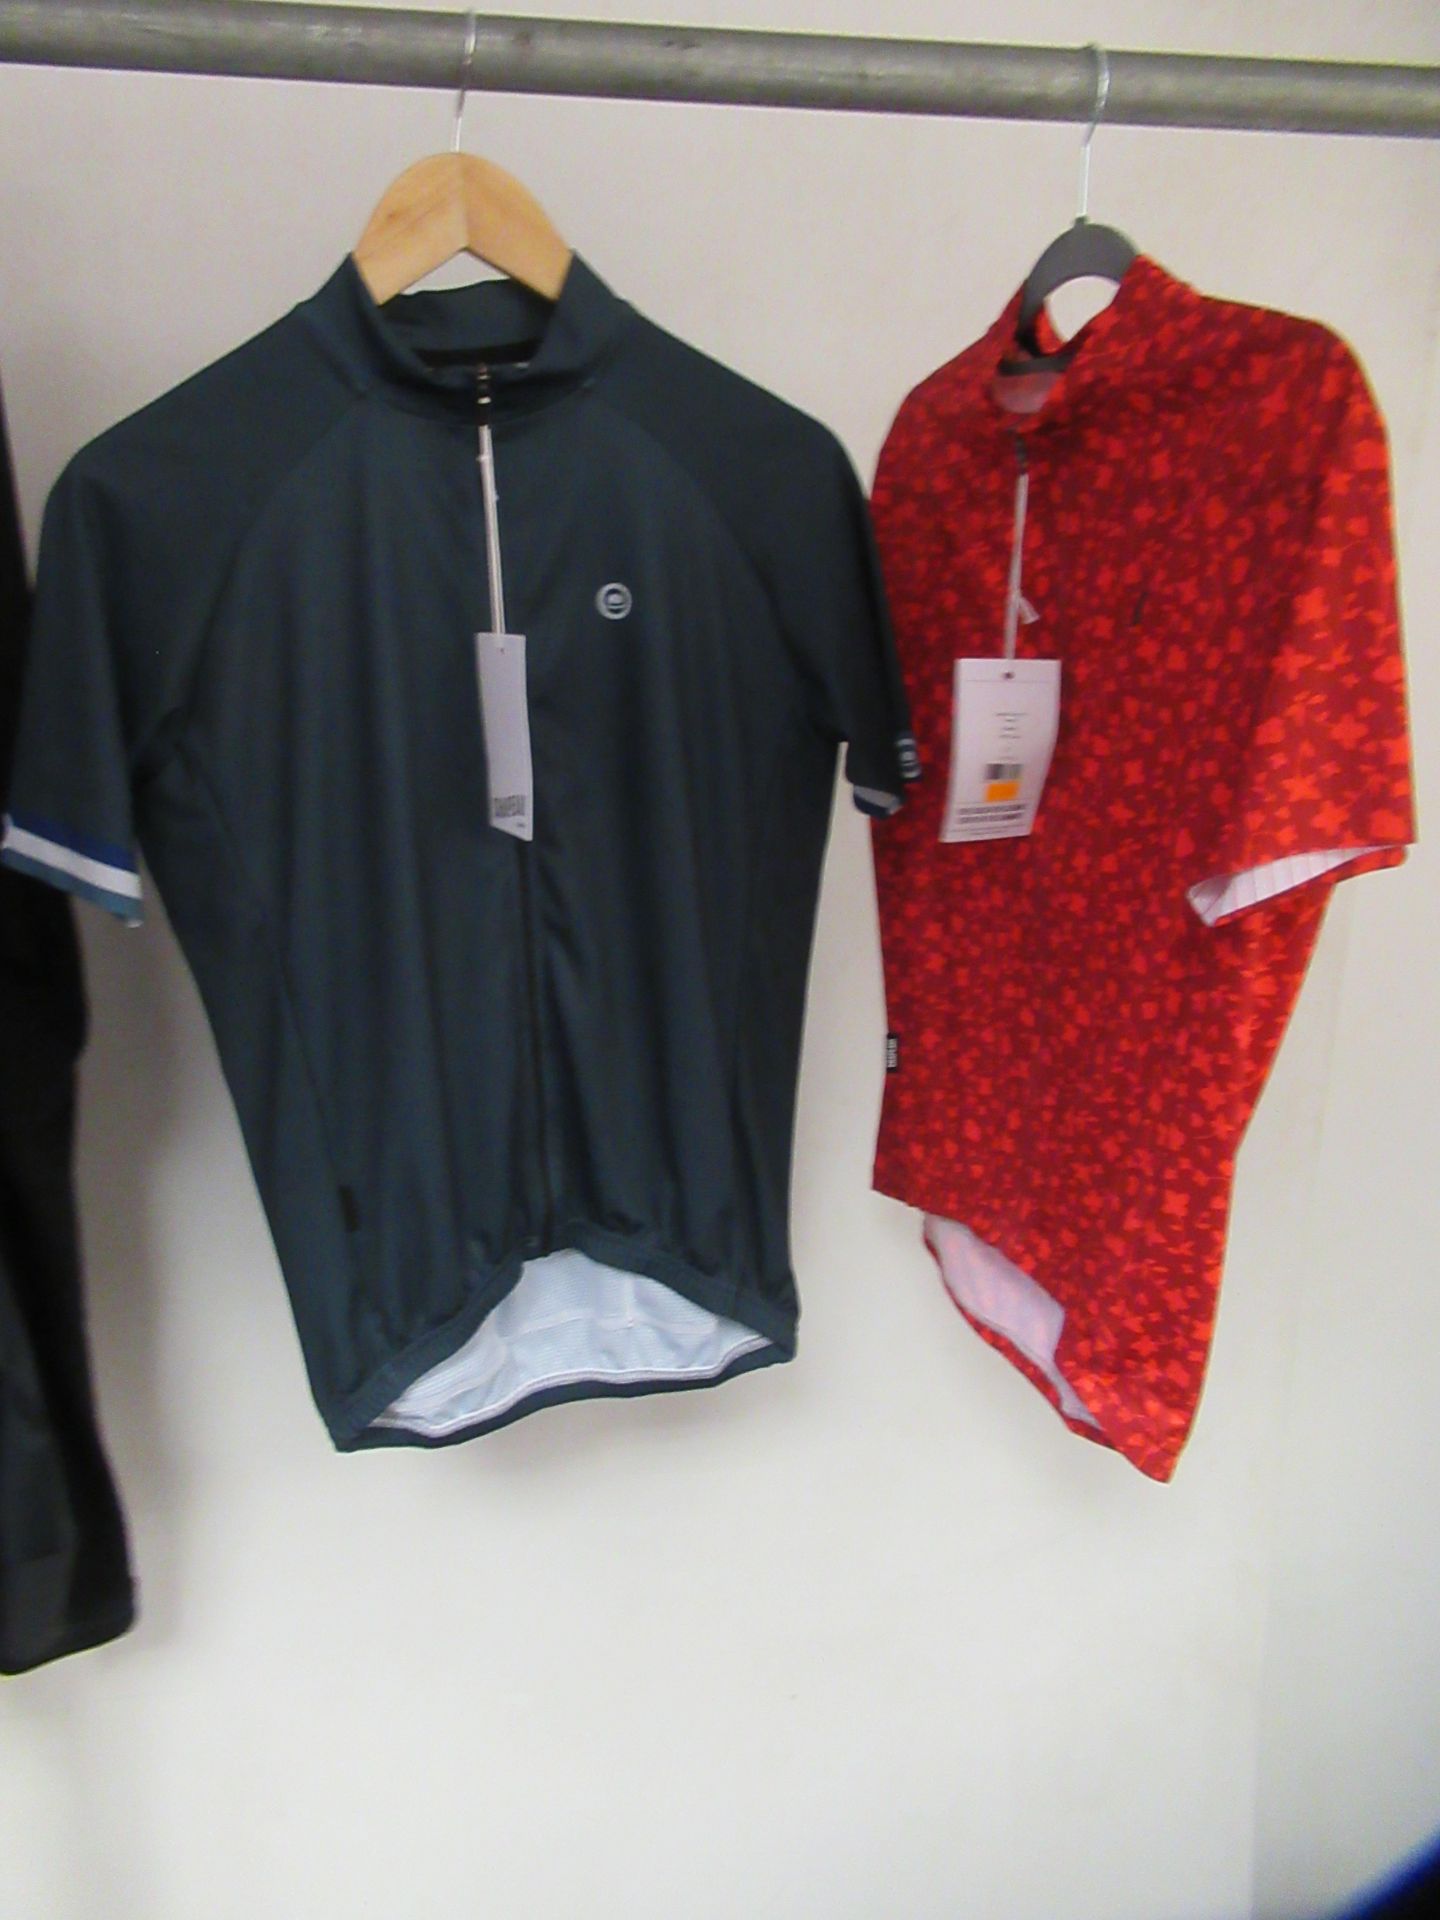 XL/16 Womens Cycling Clothes - Image 3 of 3